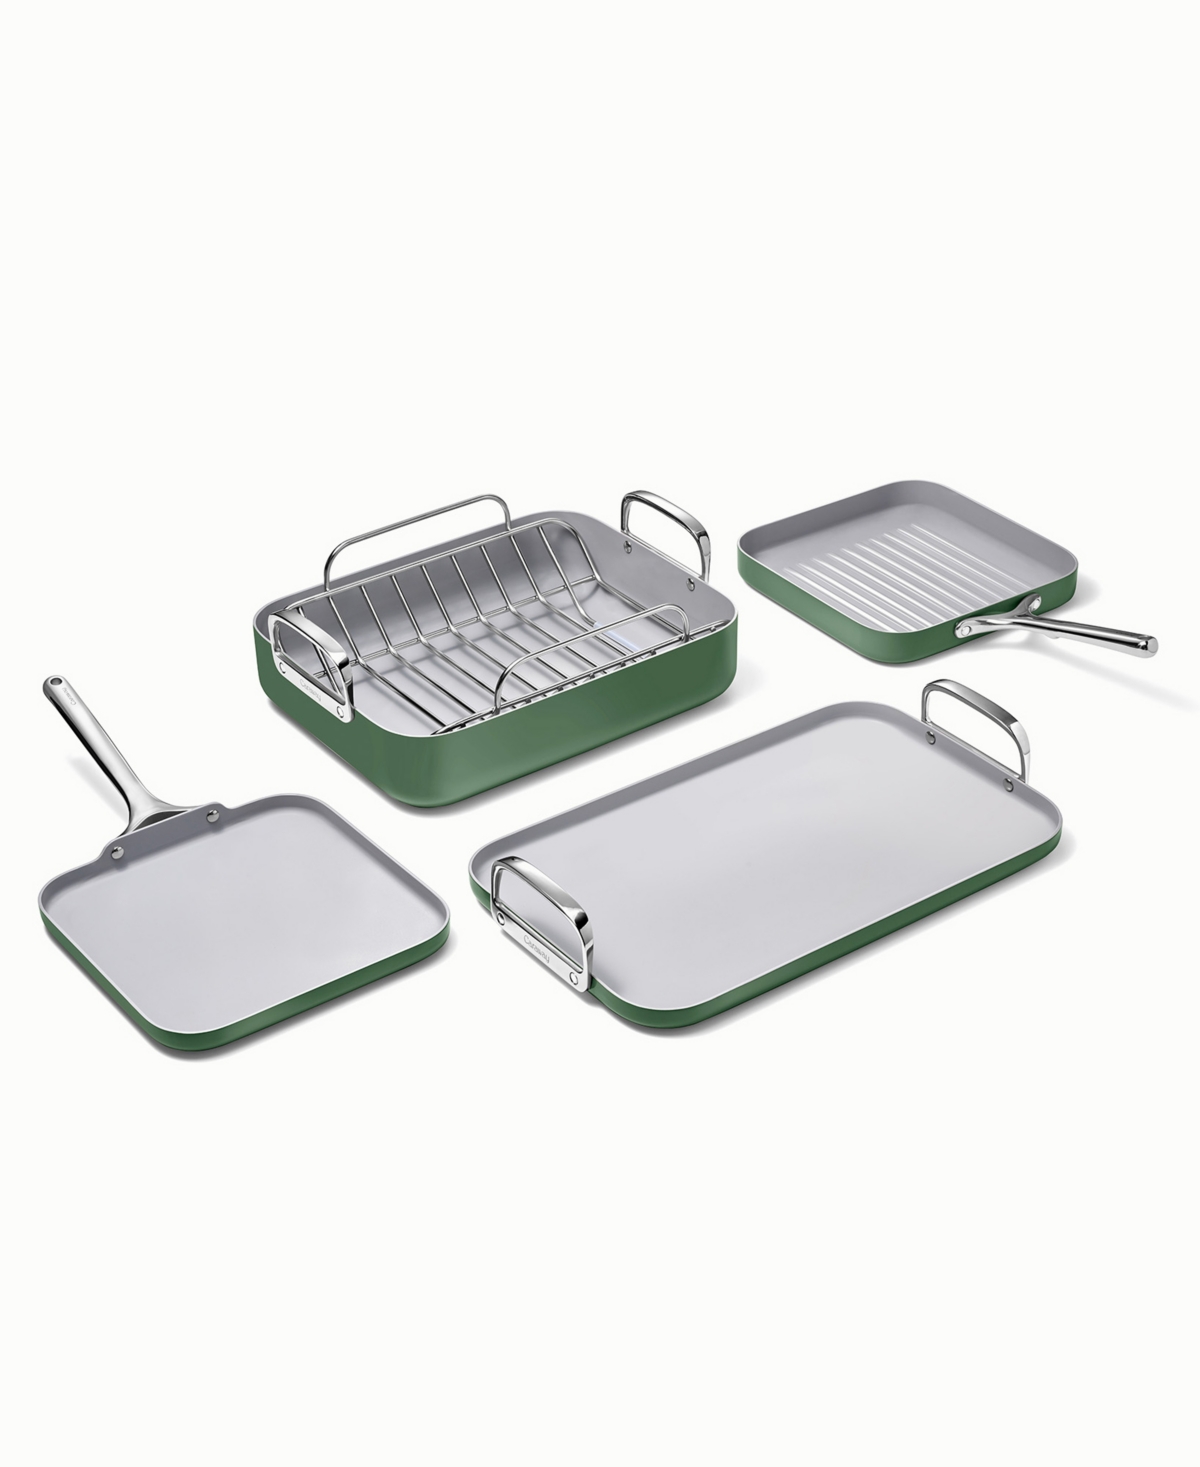 Caraway Harmless Ceramic-coated Non-stick 4-piece Square Cookware Set In Sage